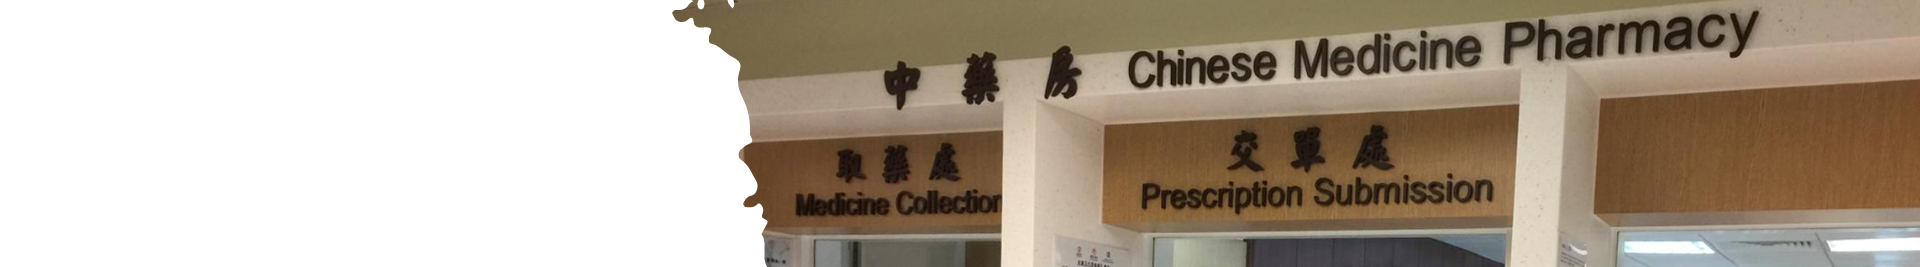 Chinese Medicine as part of the Civil Service Medical Benefits-3